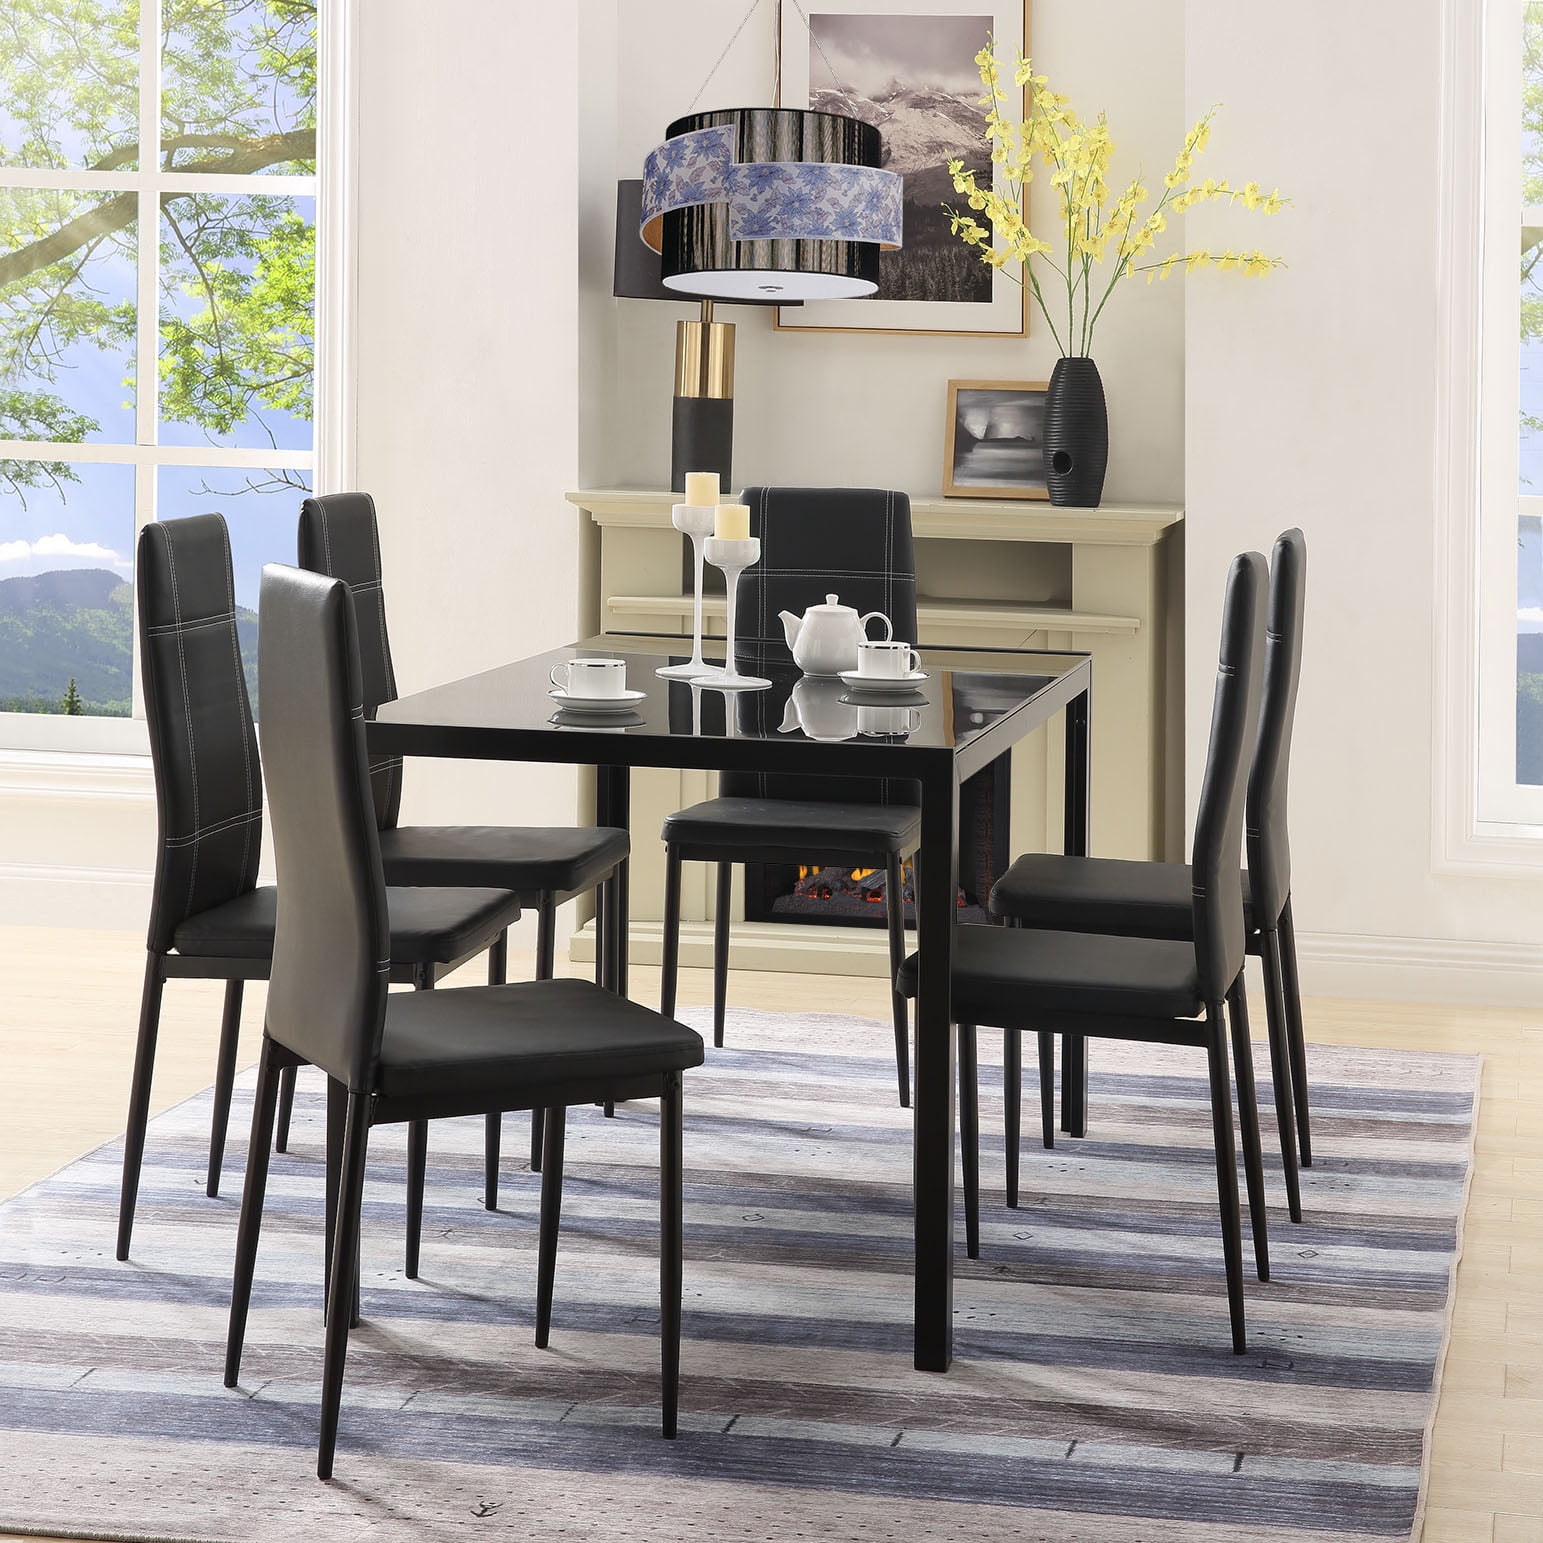 Metal Dining Table Set with 6 Chairs, Heavy-Duty Tempered Glass Dining